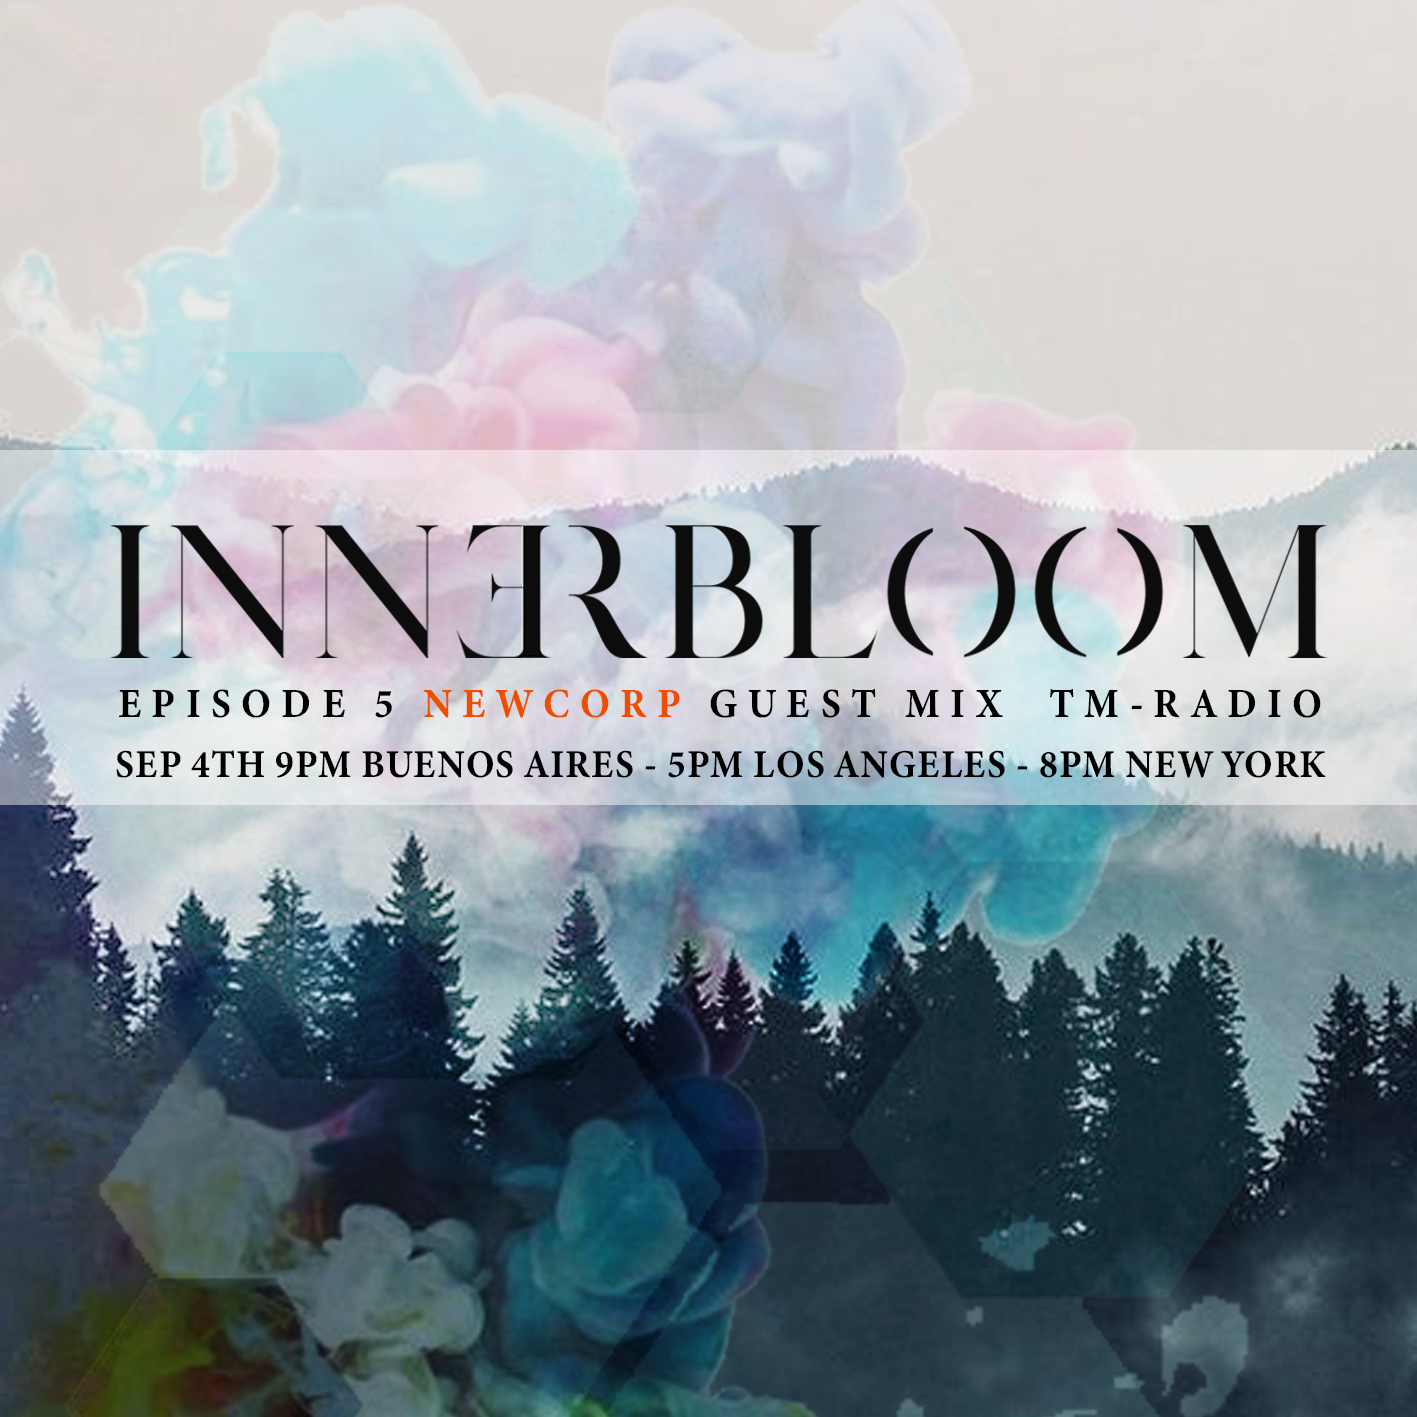 Innerbloom :: Julian Liander Pres. Innerbloom Episode 5, NEWCORP Guest Mix (aired on September 5th, 2019) banner logo